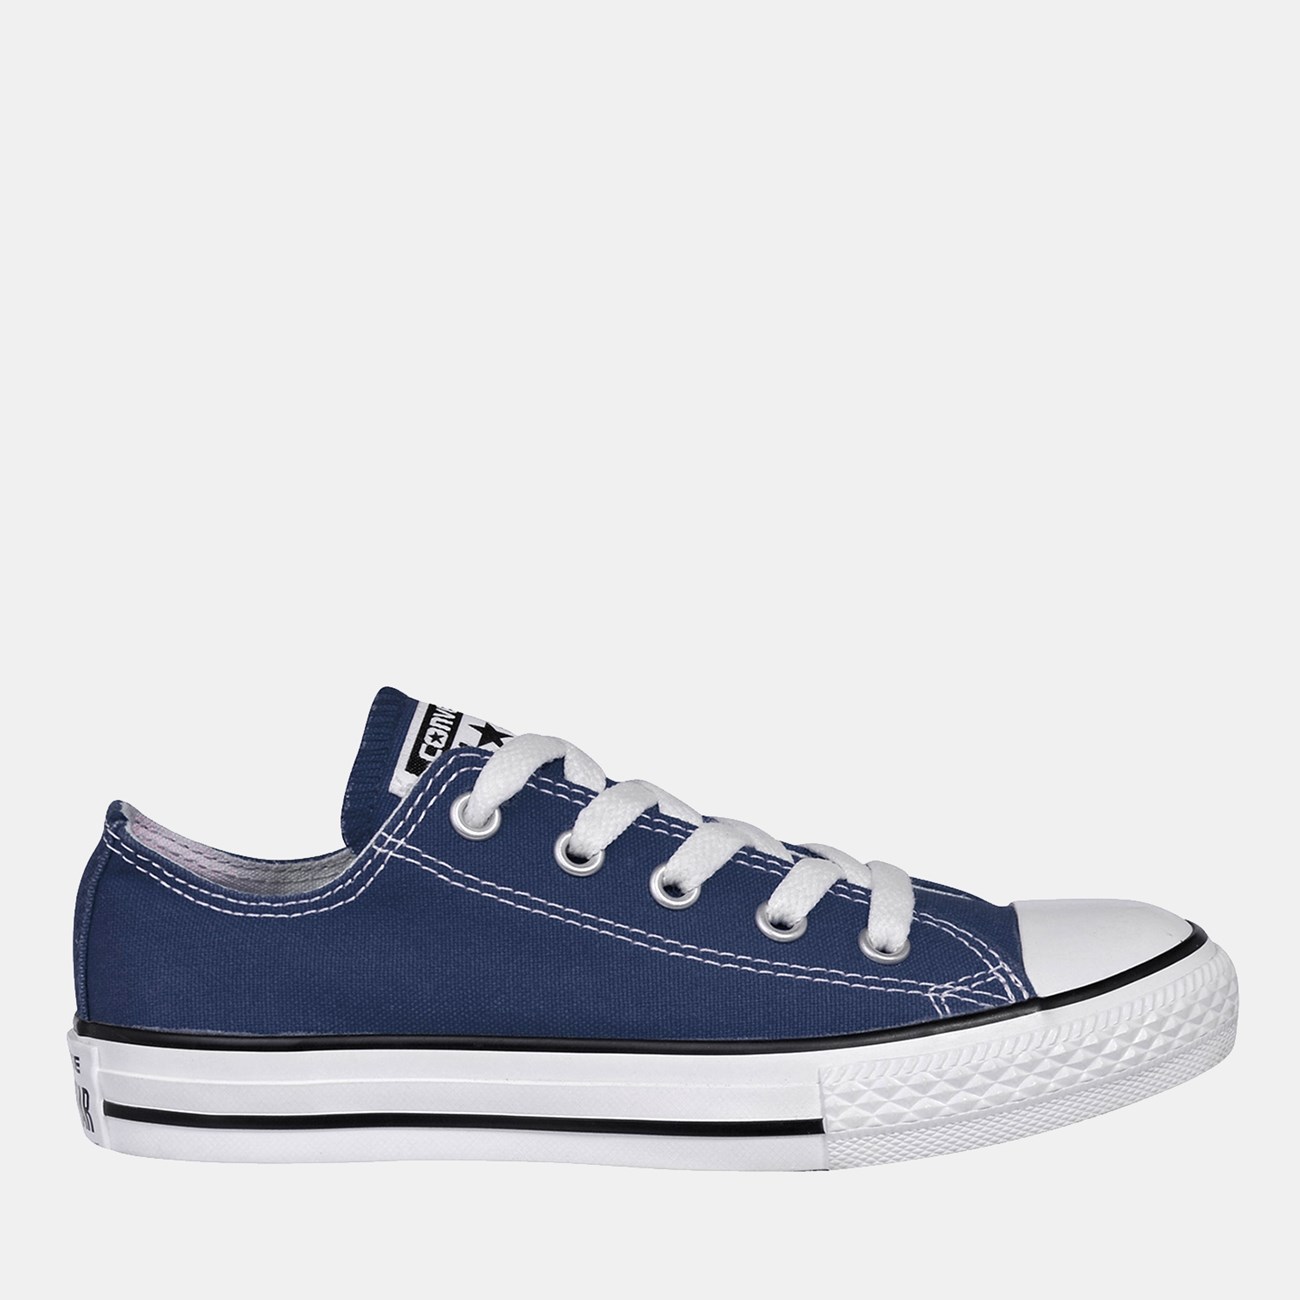 CONVERSE ALL STAR LOW JR 3J237C - The Athlete's Foot